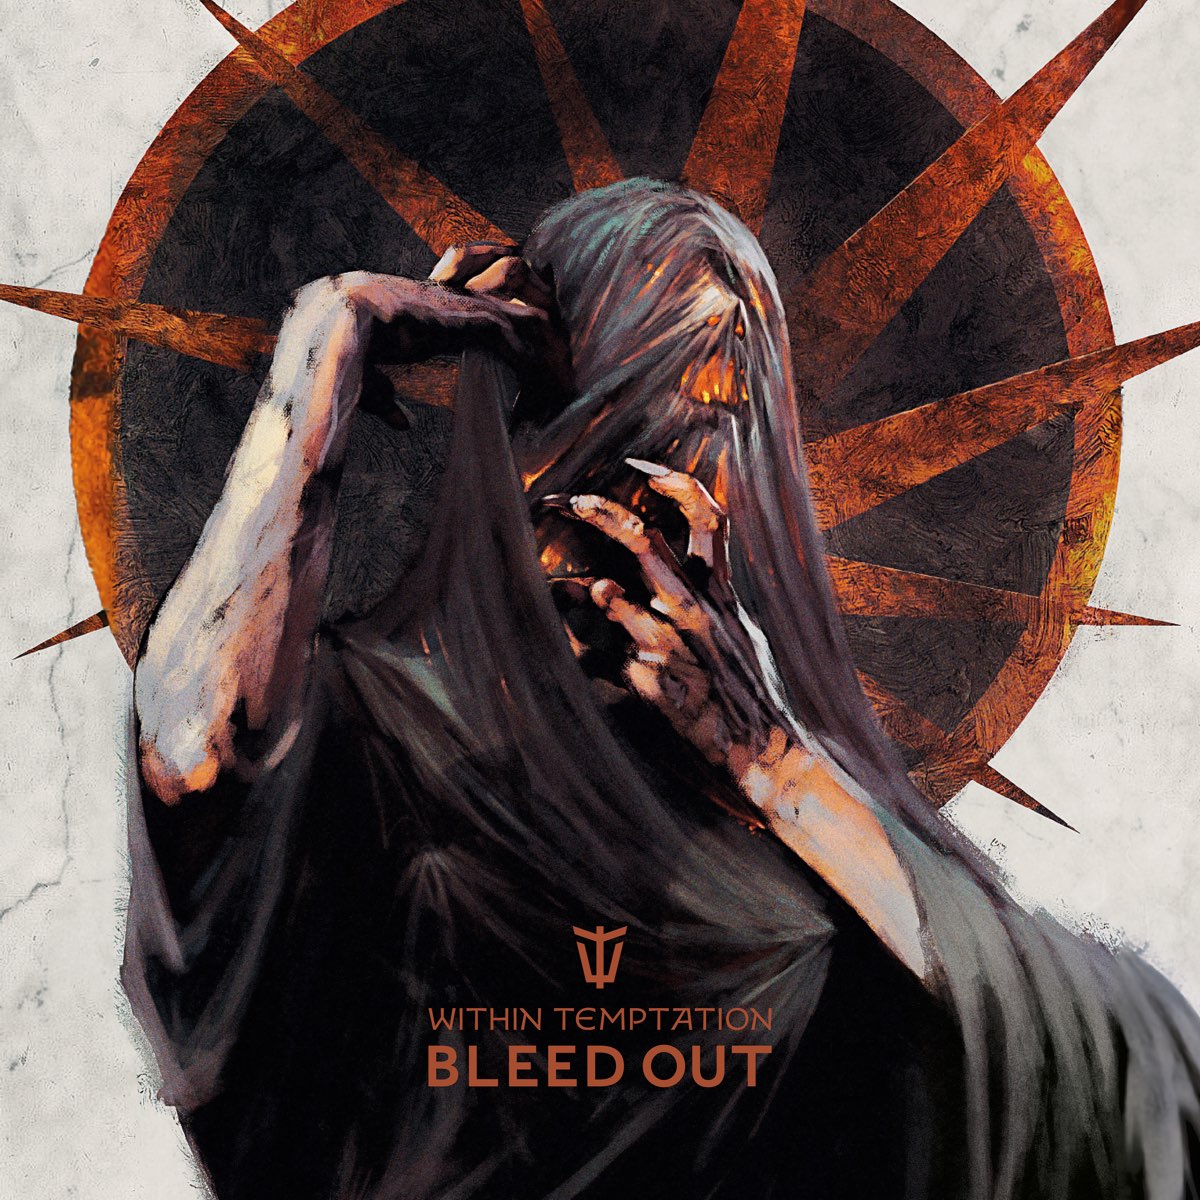 Металл MOVFR Within Temptation - Bleed Out (Black Vinyl LP) металл movfr within temptation bleed out alternative cover black vinyl 2lp